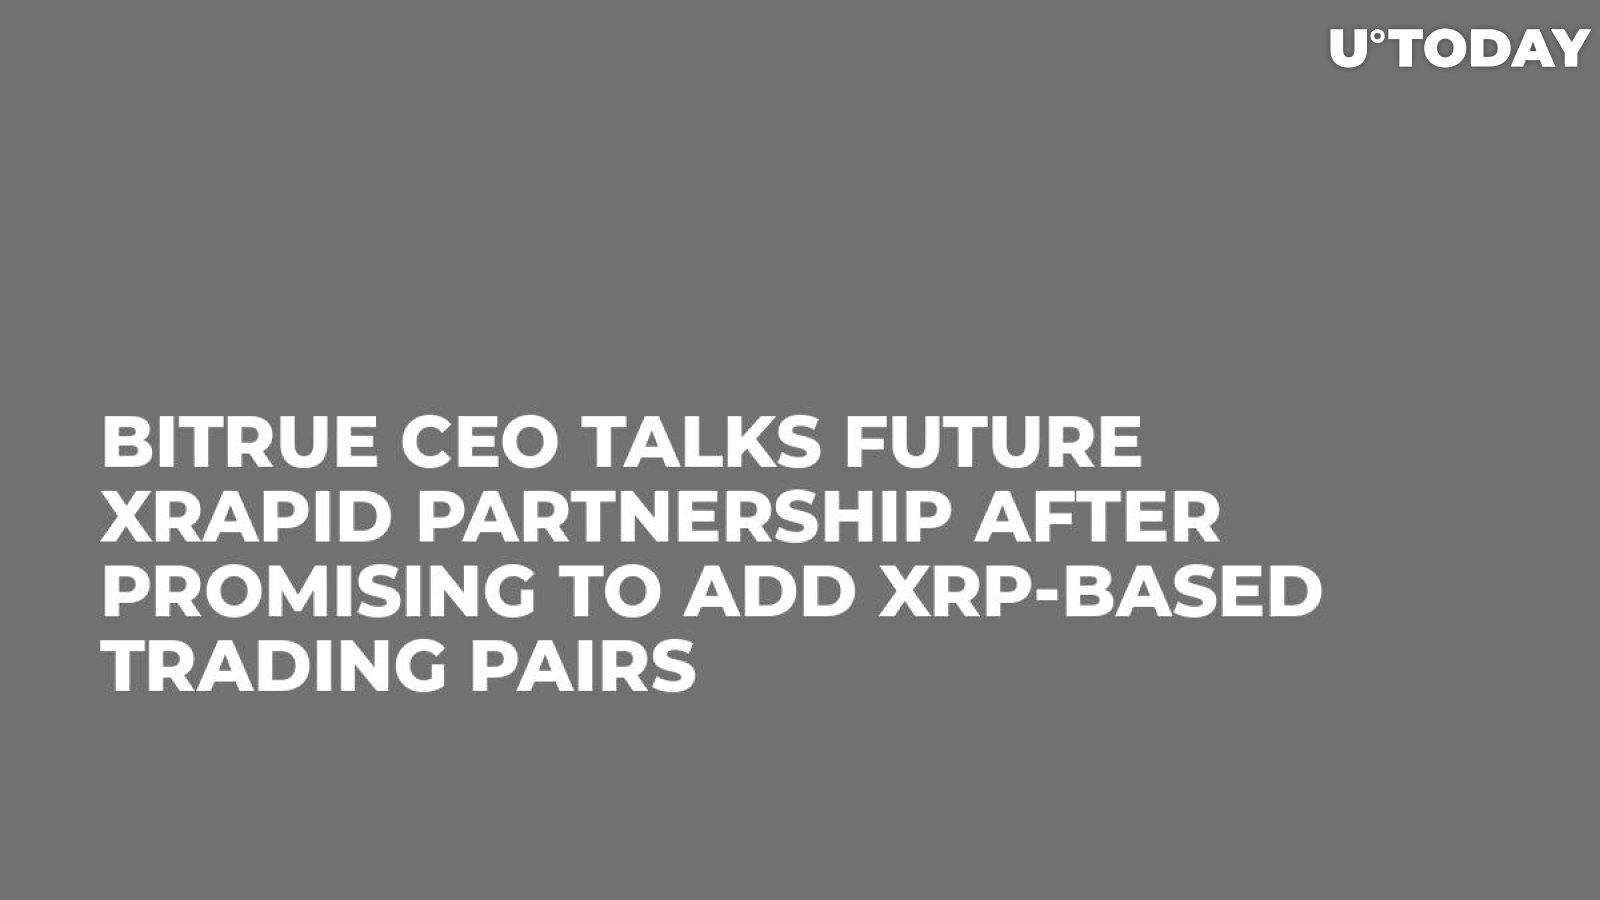 Bitrue CEO Talks Future xRapid Partnership After Promising to Add XRP-Based Trading Pairs